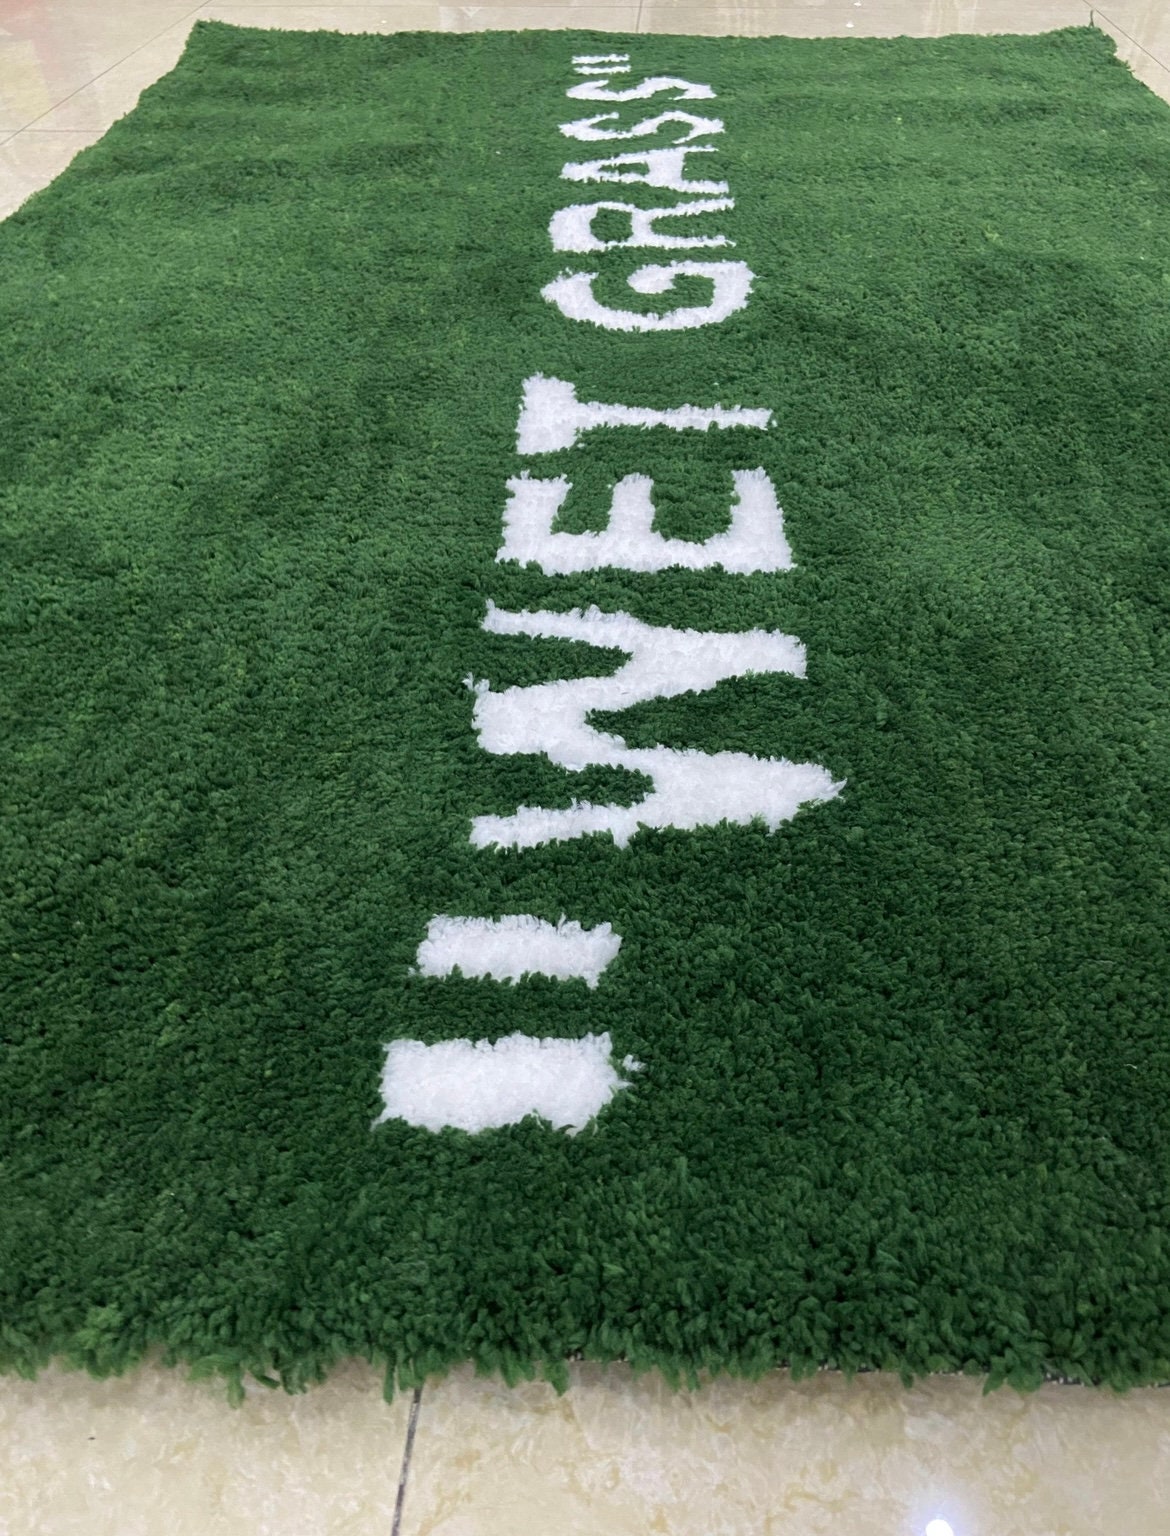 IKEA X off White WET GRASS Rug Designed by Virgil Abloh, Available in ...